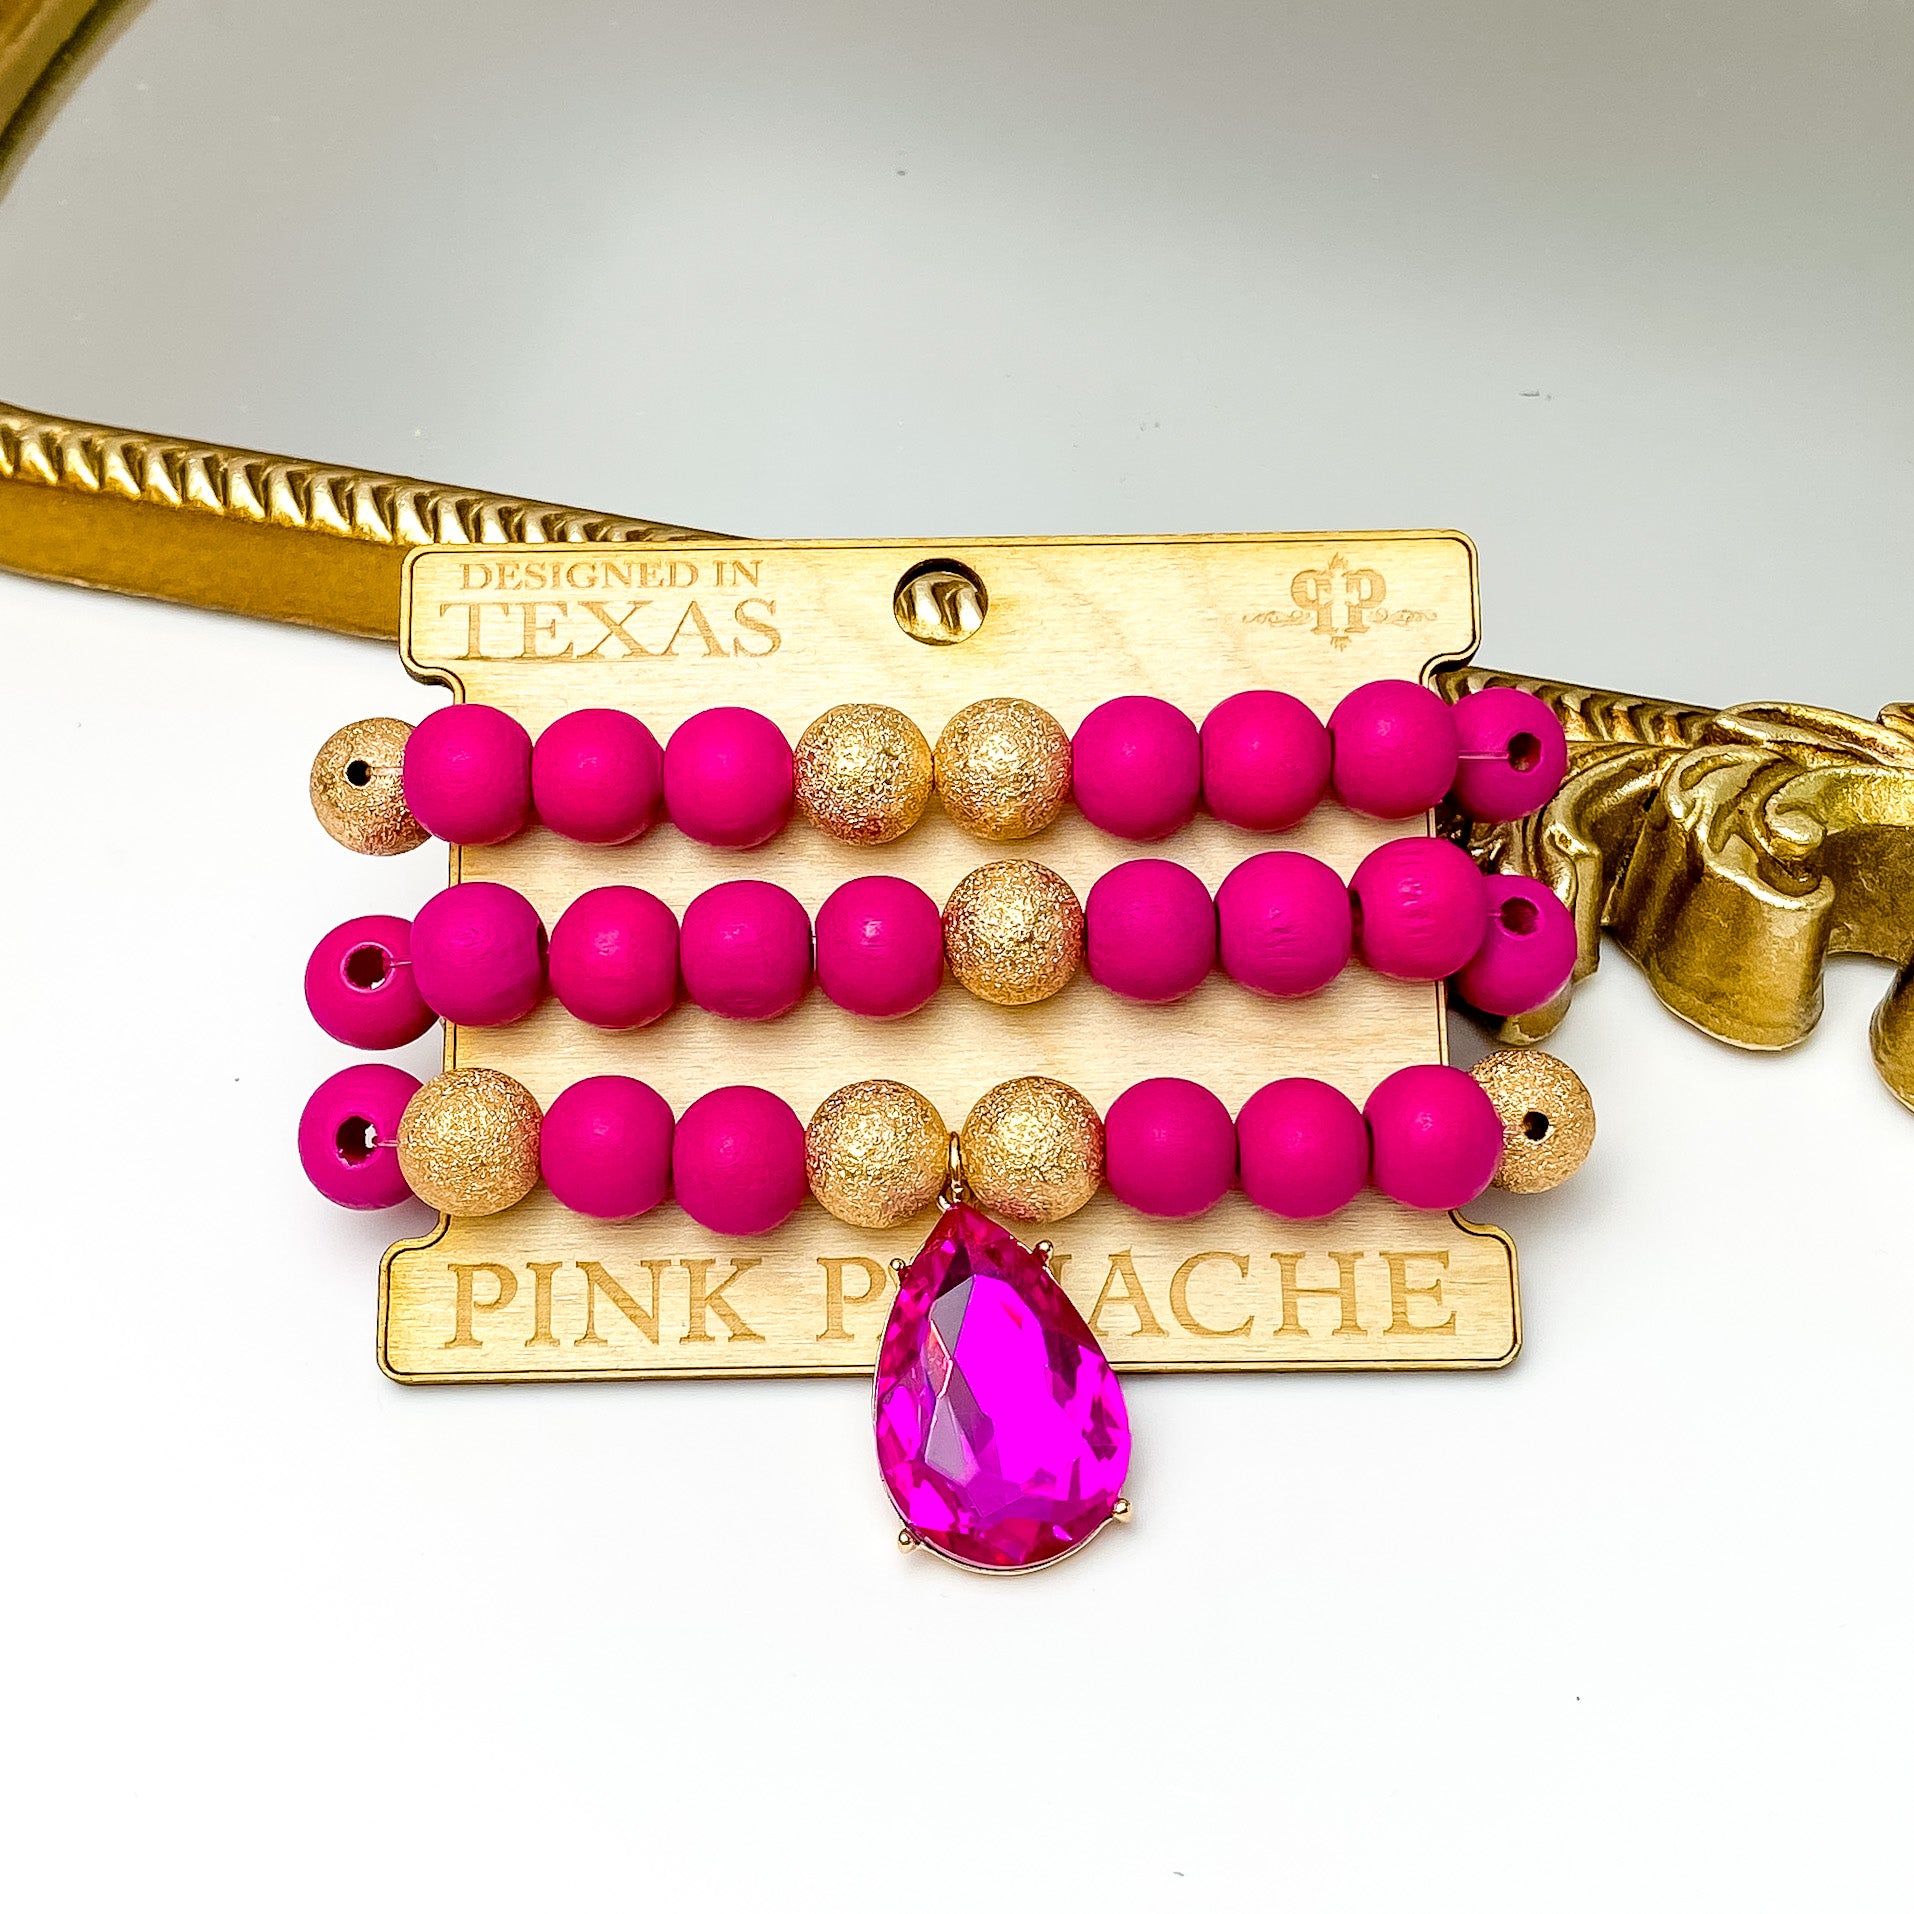 Set of three fuchsia and gold bead bracelets. This set also includes a large, fuchsia teardrop crystal. These bracelets are pictured on a Pink Panache wood holder in front of a gold mirror and on a white background.